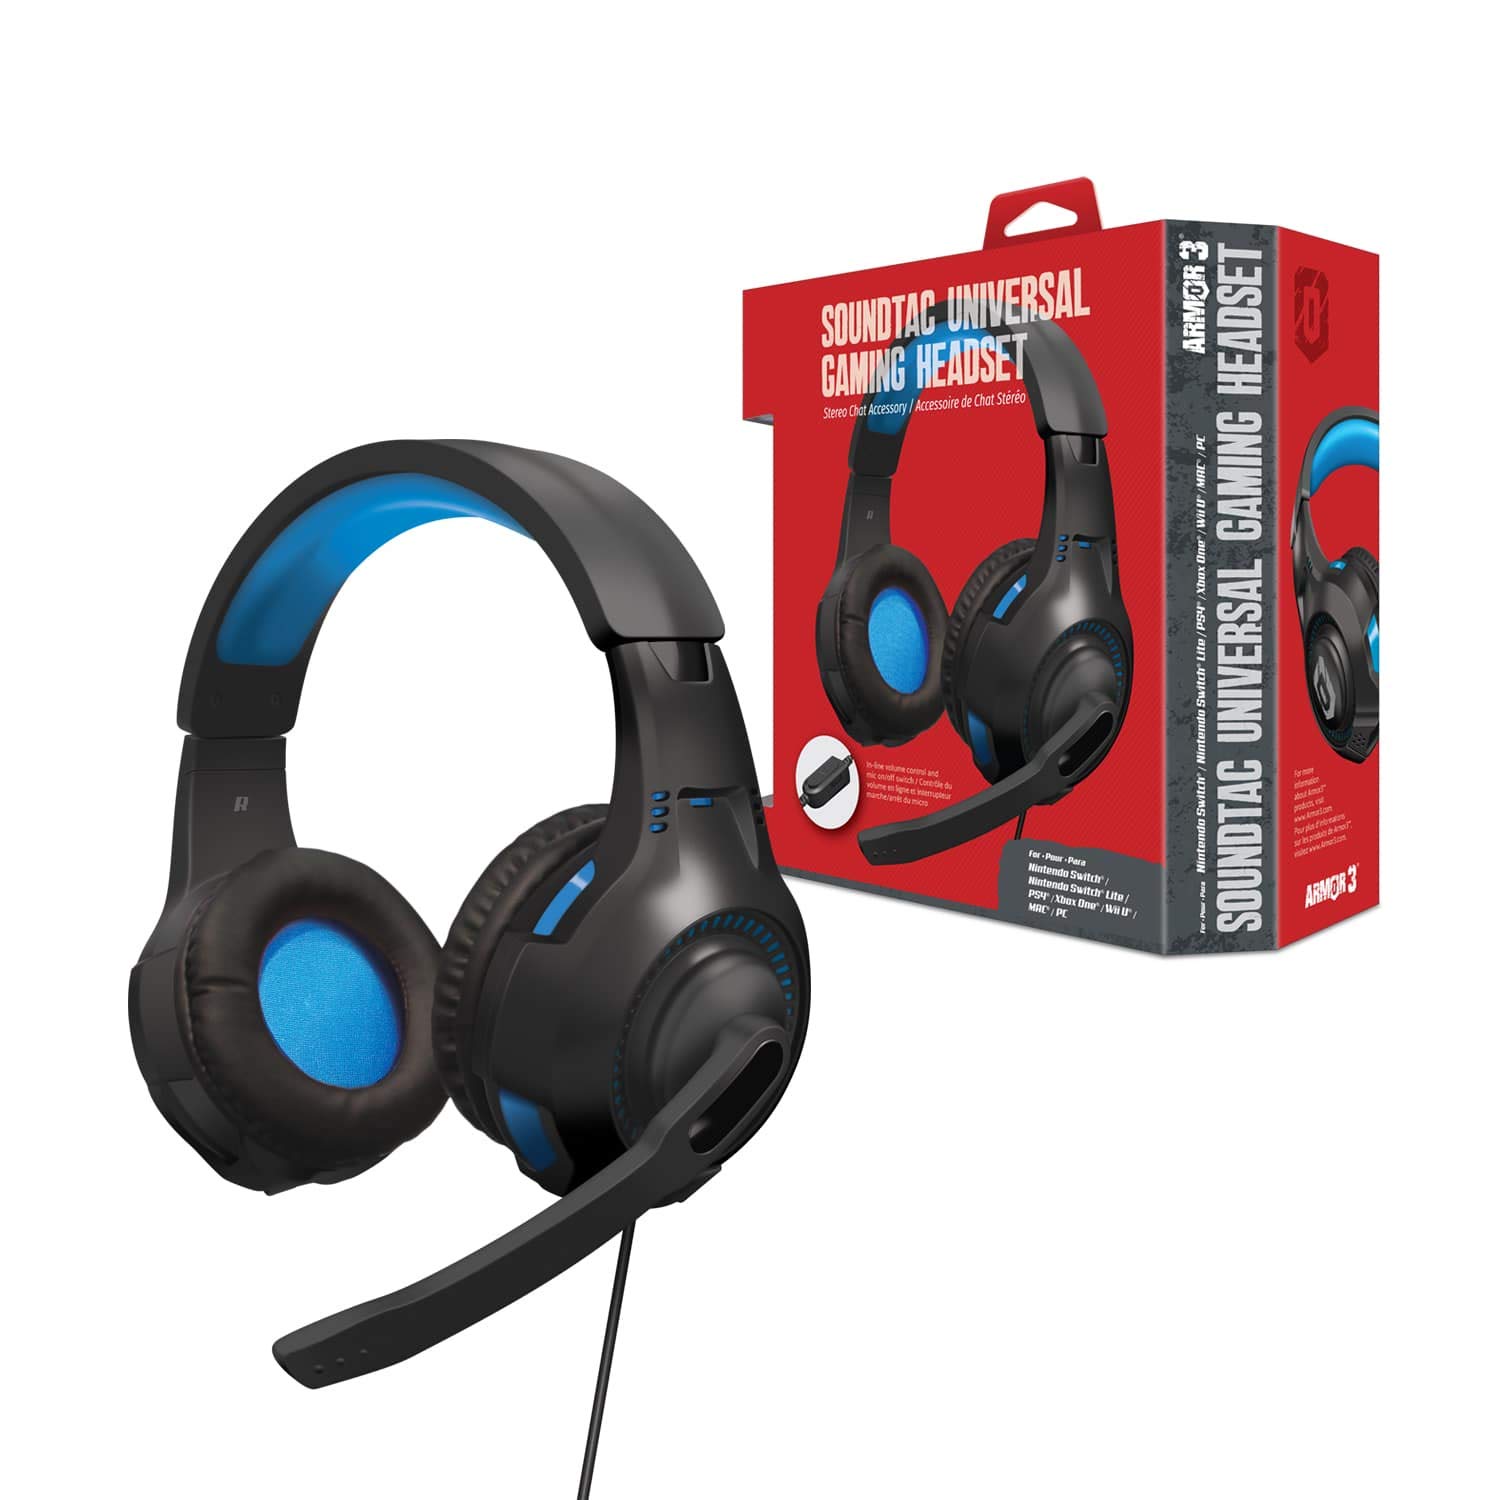 Armor3 "Soundtac" Universal Gaming Headset (Blue) for Xbox Series X/Xbox Series S/Nintendo Switch/Lite/ PS4/ PS5/ Xbox One/Wii U/PC/Mac - PlayStation 5 $15.55 at Amazon